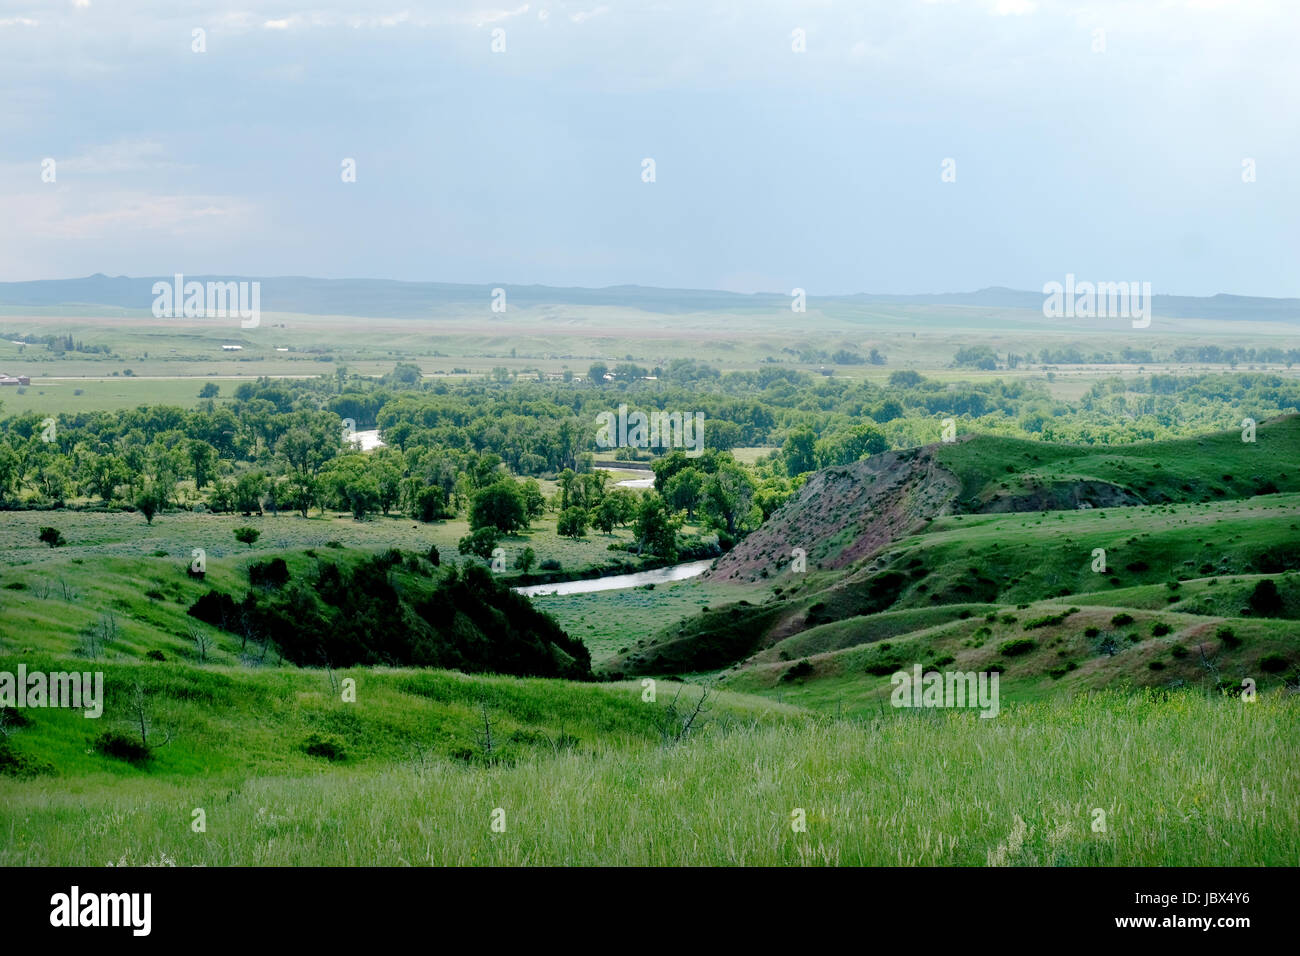 A view looking down on the Bighorn river valley where the native indian camp was situated in the lead up to the Battle of the Little Bighorn in 1876 Stock Photo